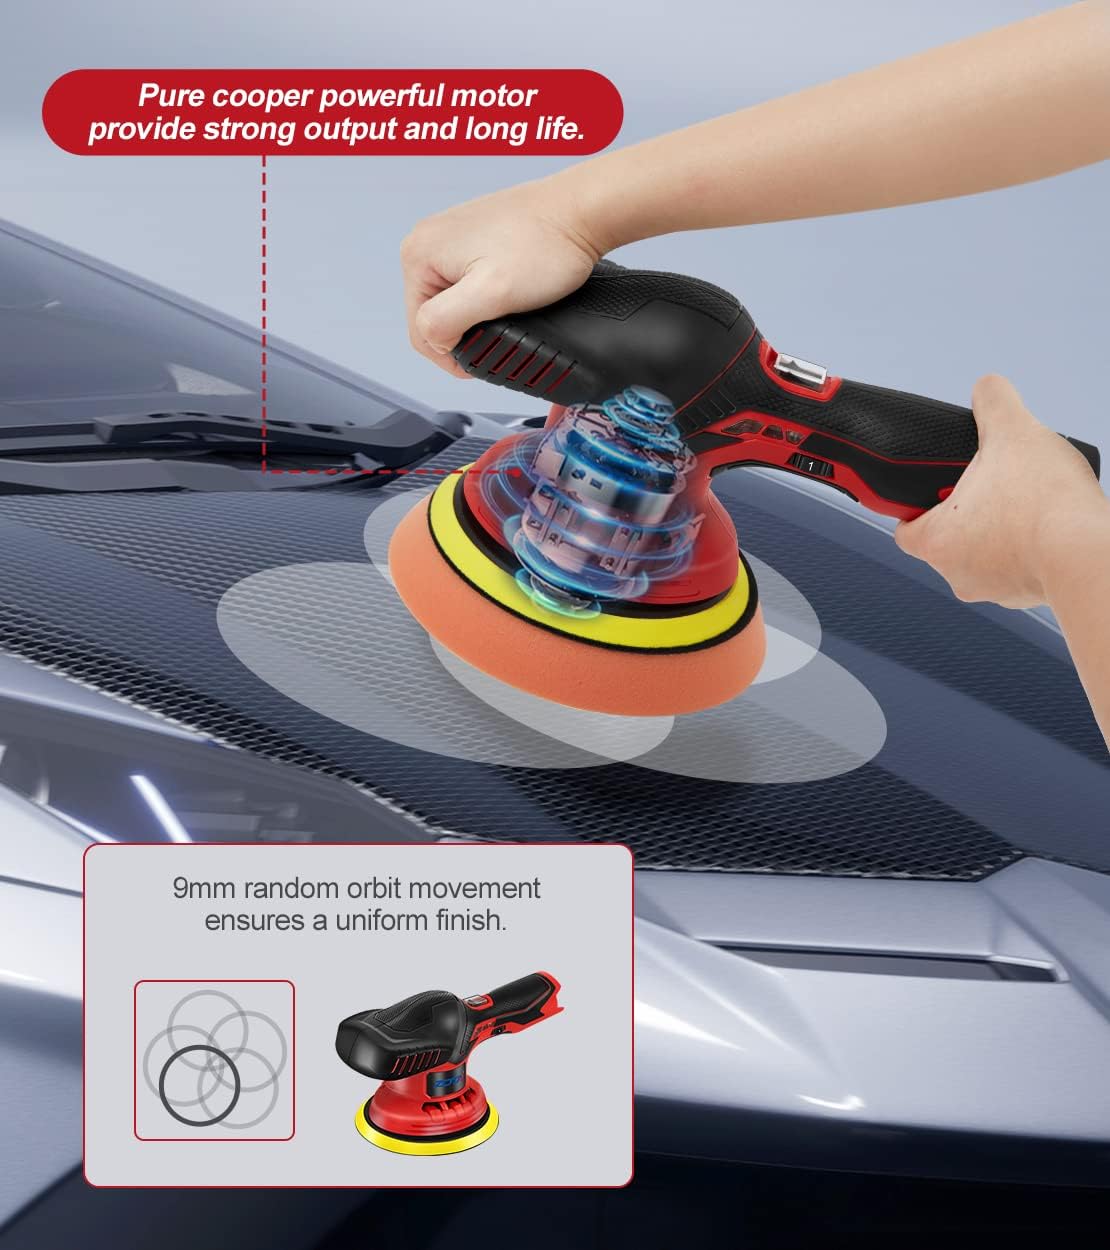 ZOTA Cordless Buffer Polisher for Car,6 inch 2pcs 12V/2.0Ah Lithium Rechargeable Battery Cordless Polisher with 6 Variable Speed,Quiet Orbital Car Buffers and Polishers kit.